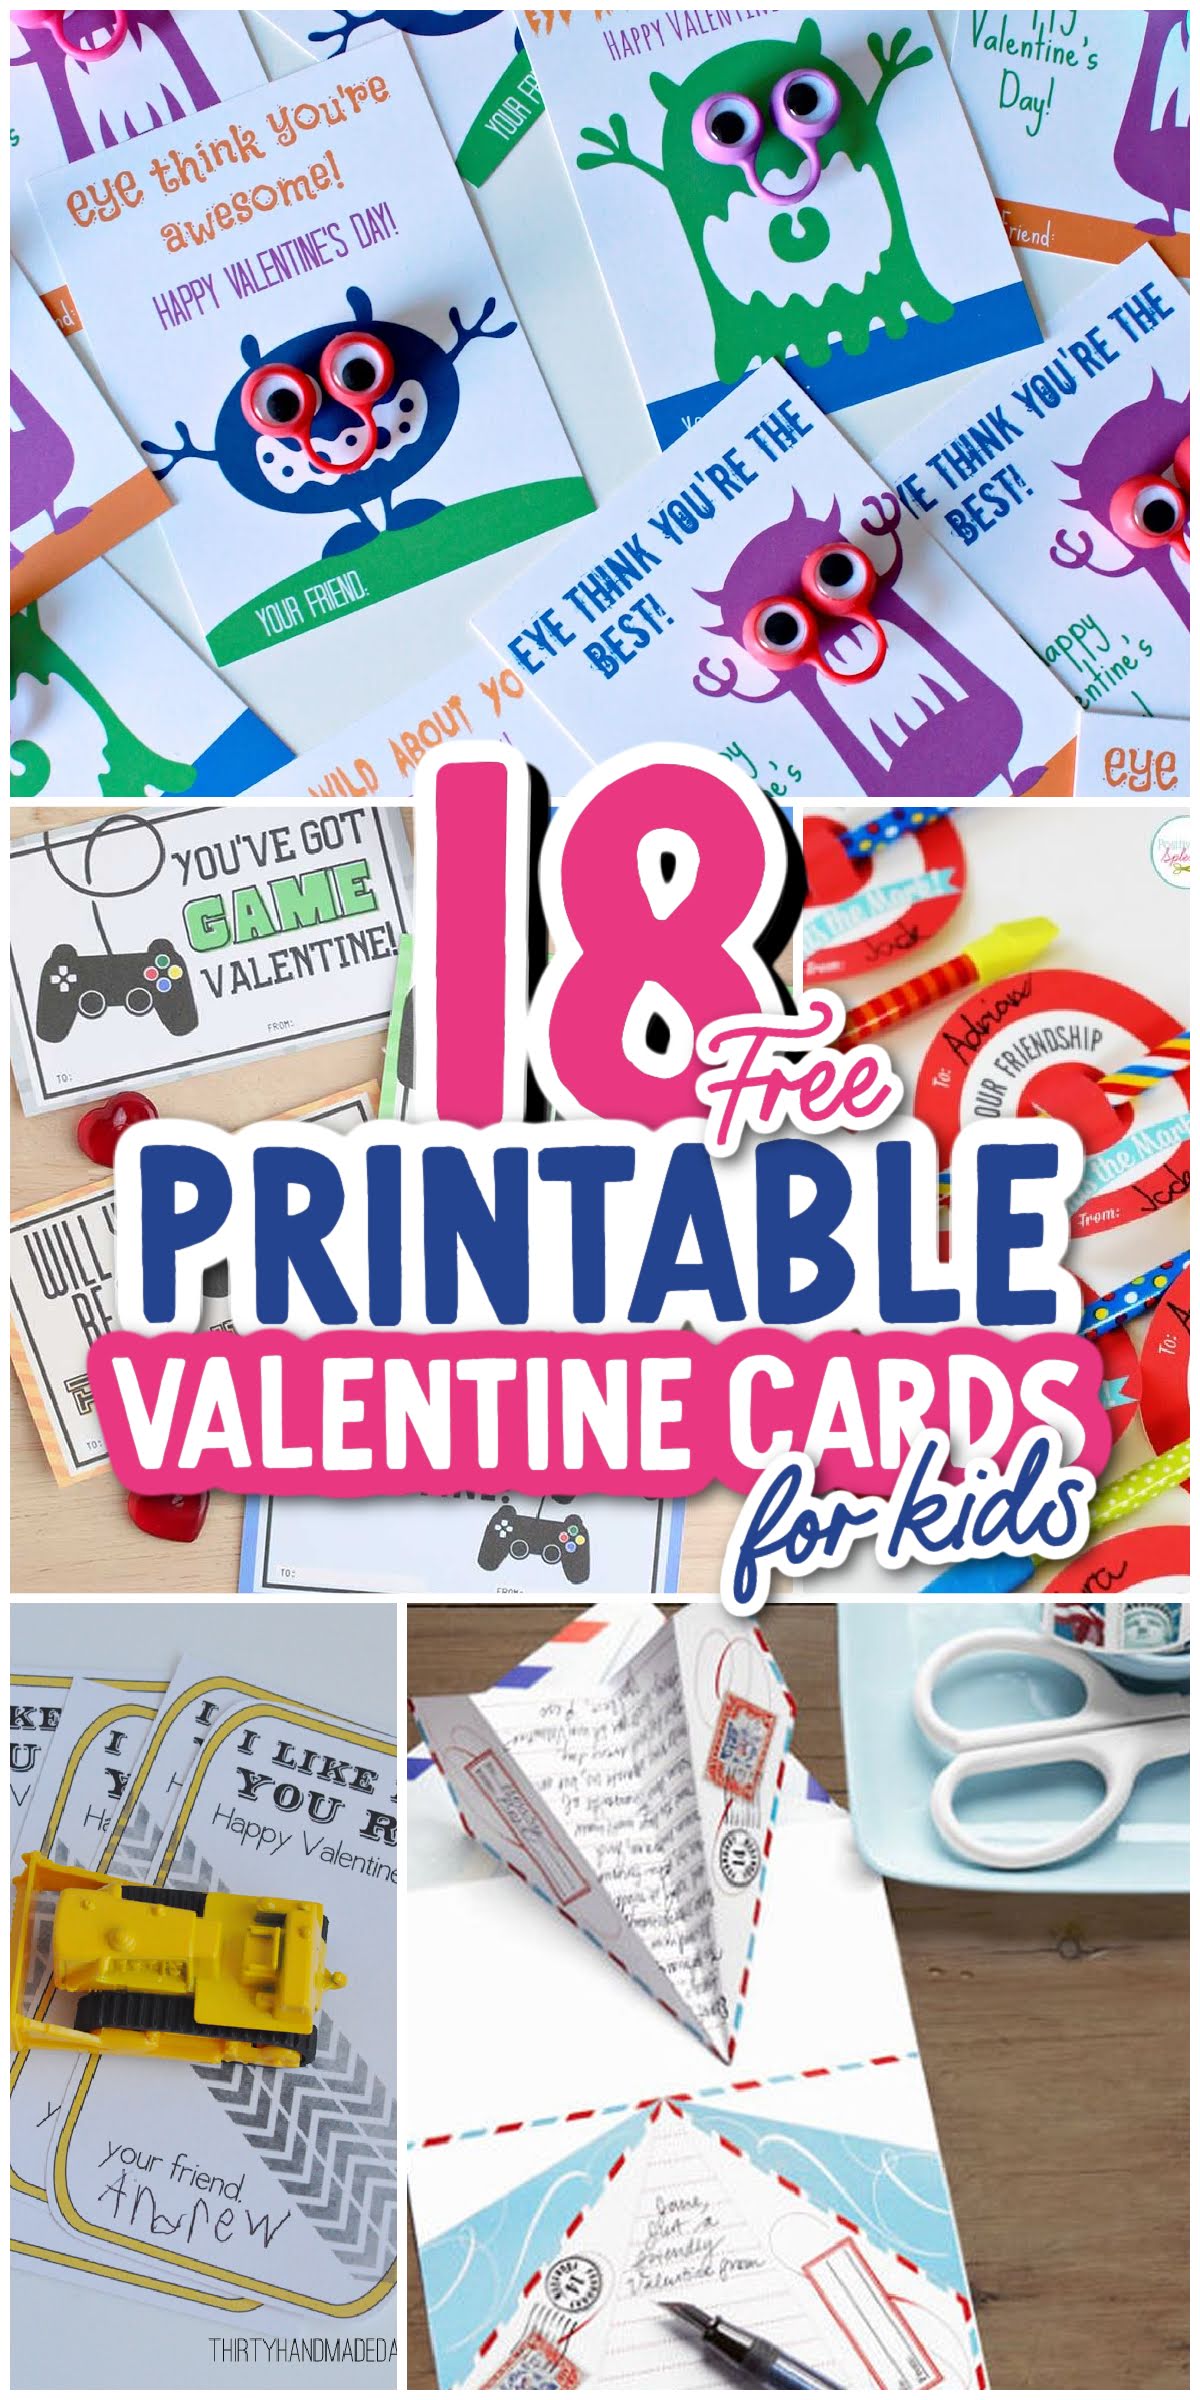 18 FREE Printable Valentine's Cards For Kids - Spaceships and Laser Beams